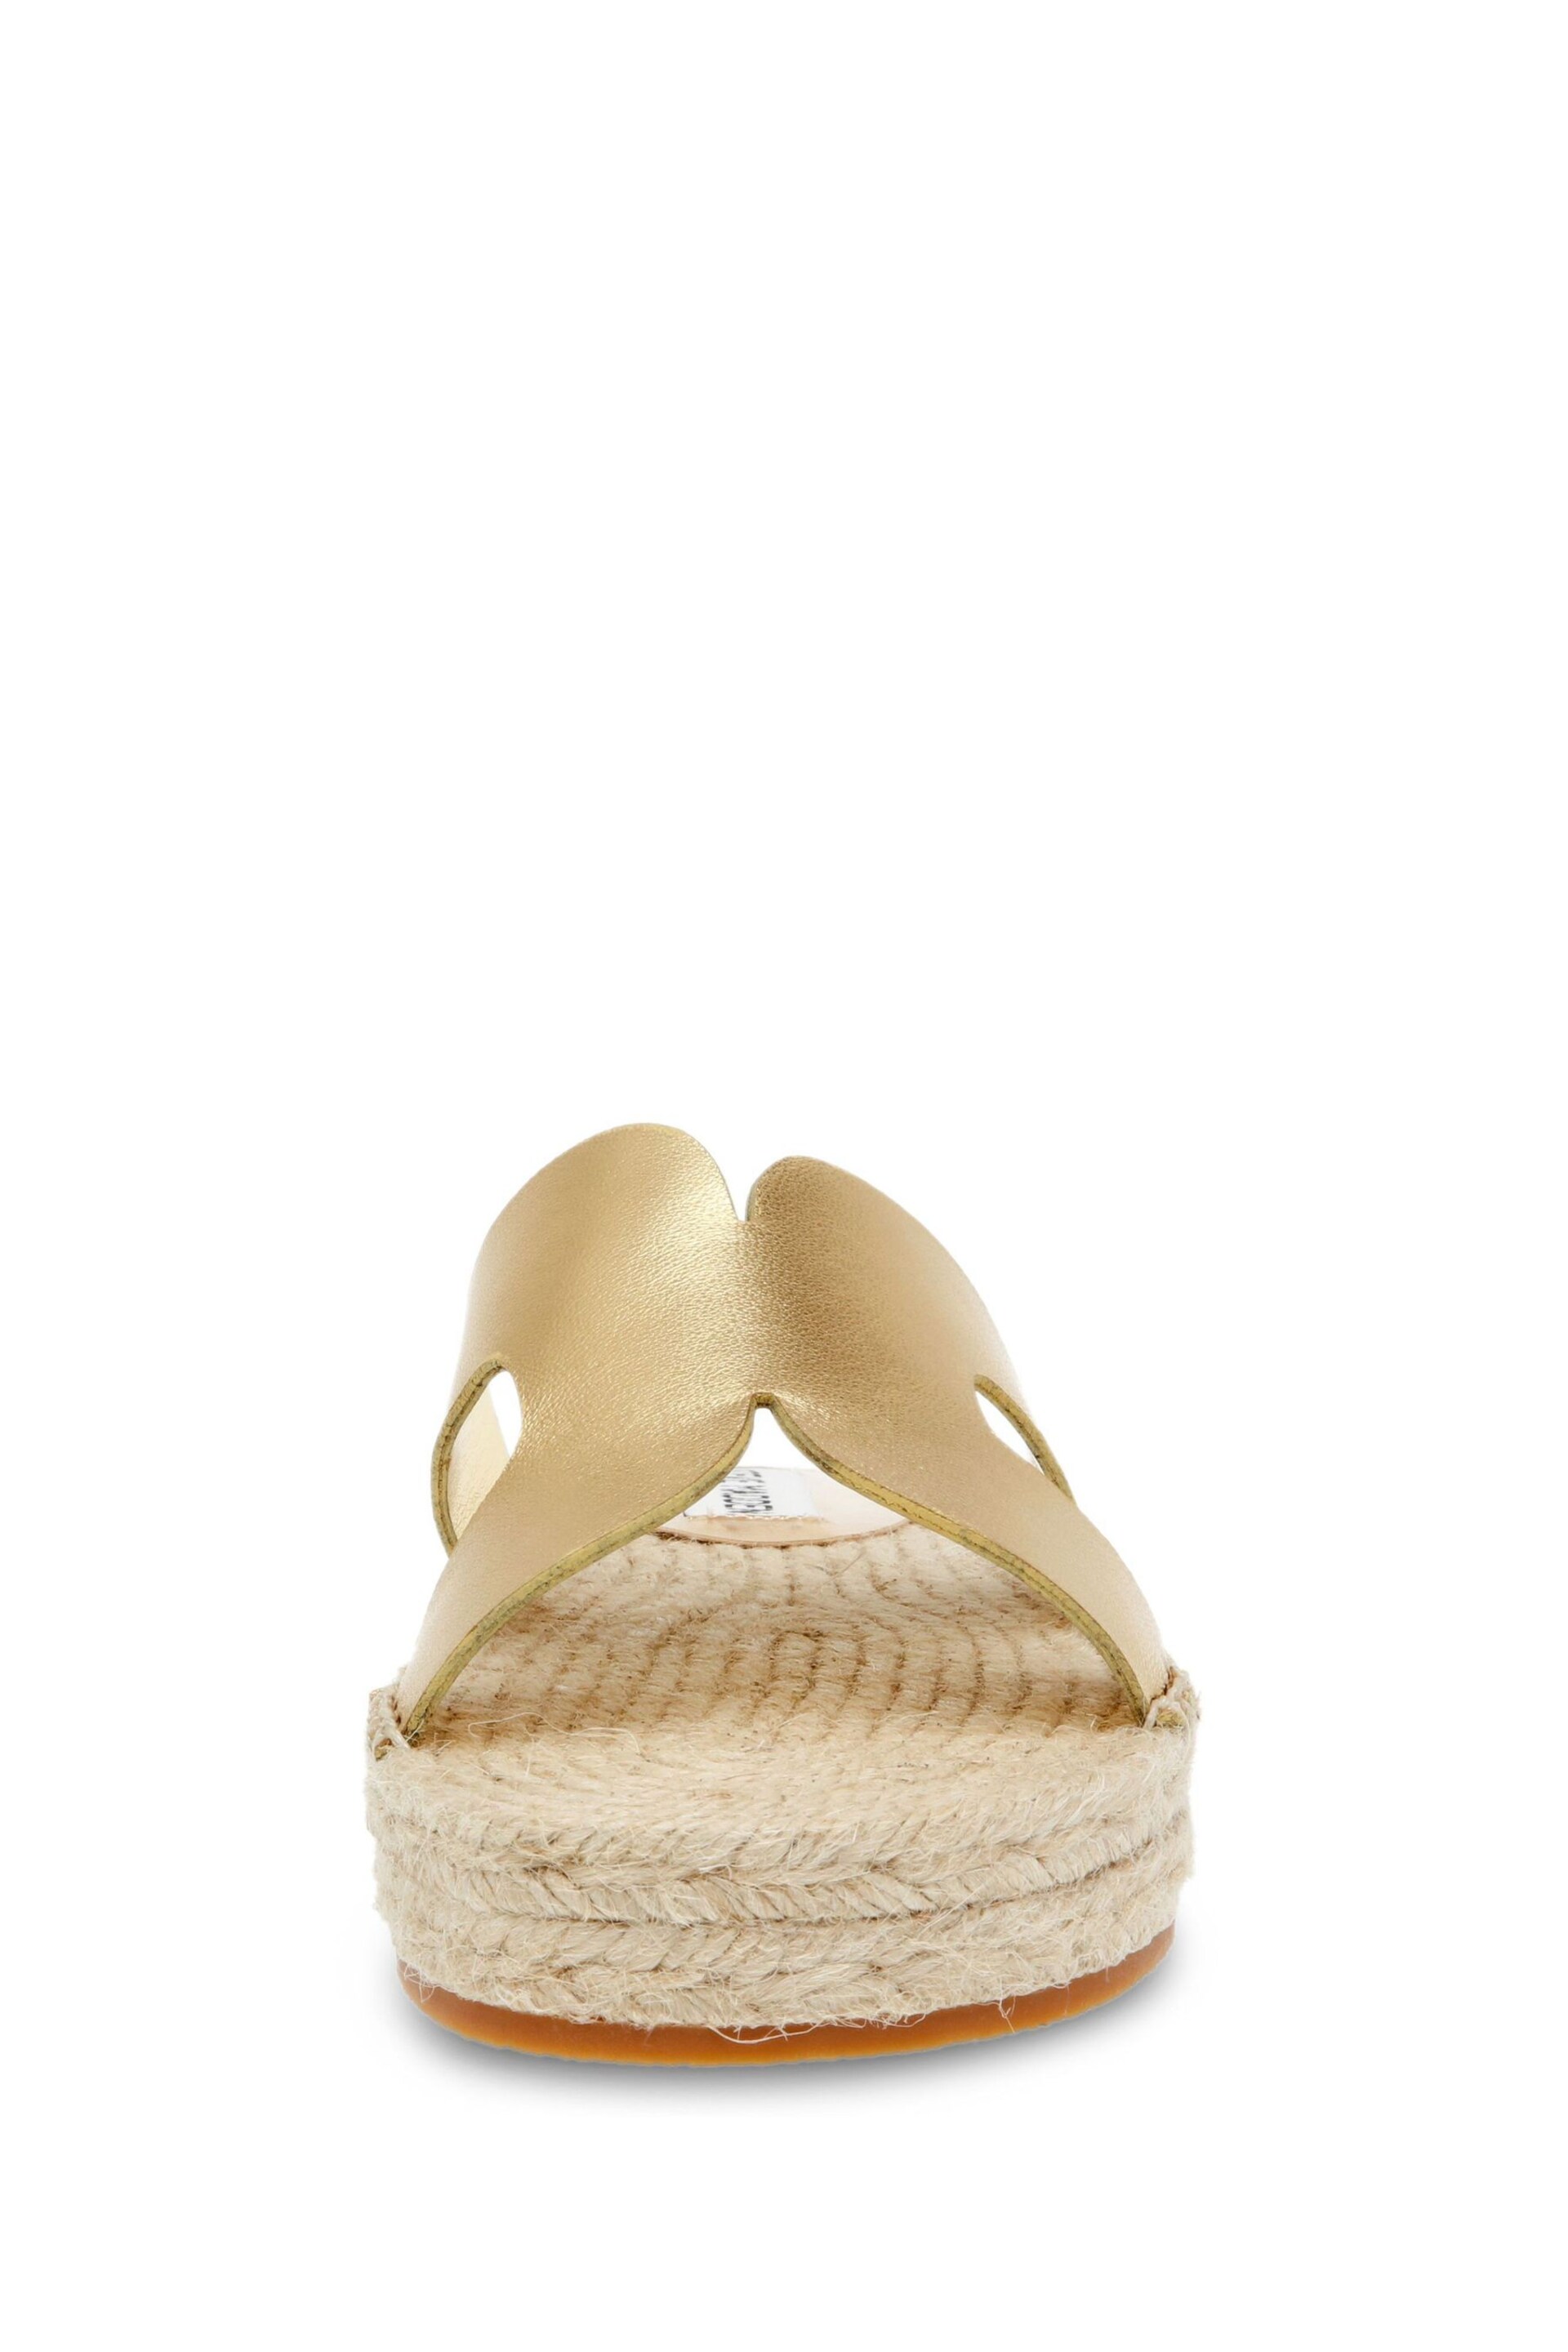 Steve Madden Gold Cheer up Sandals - Image 4 of 6